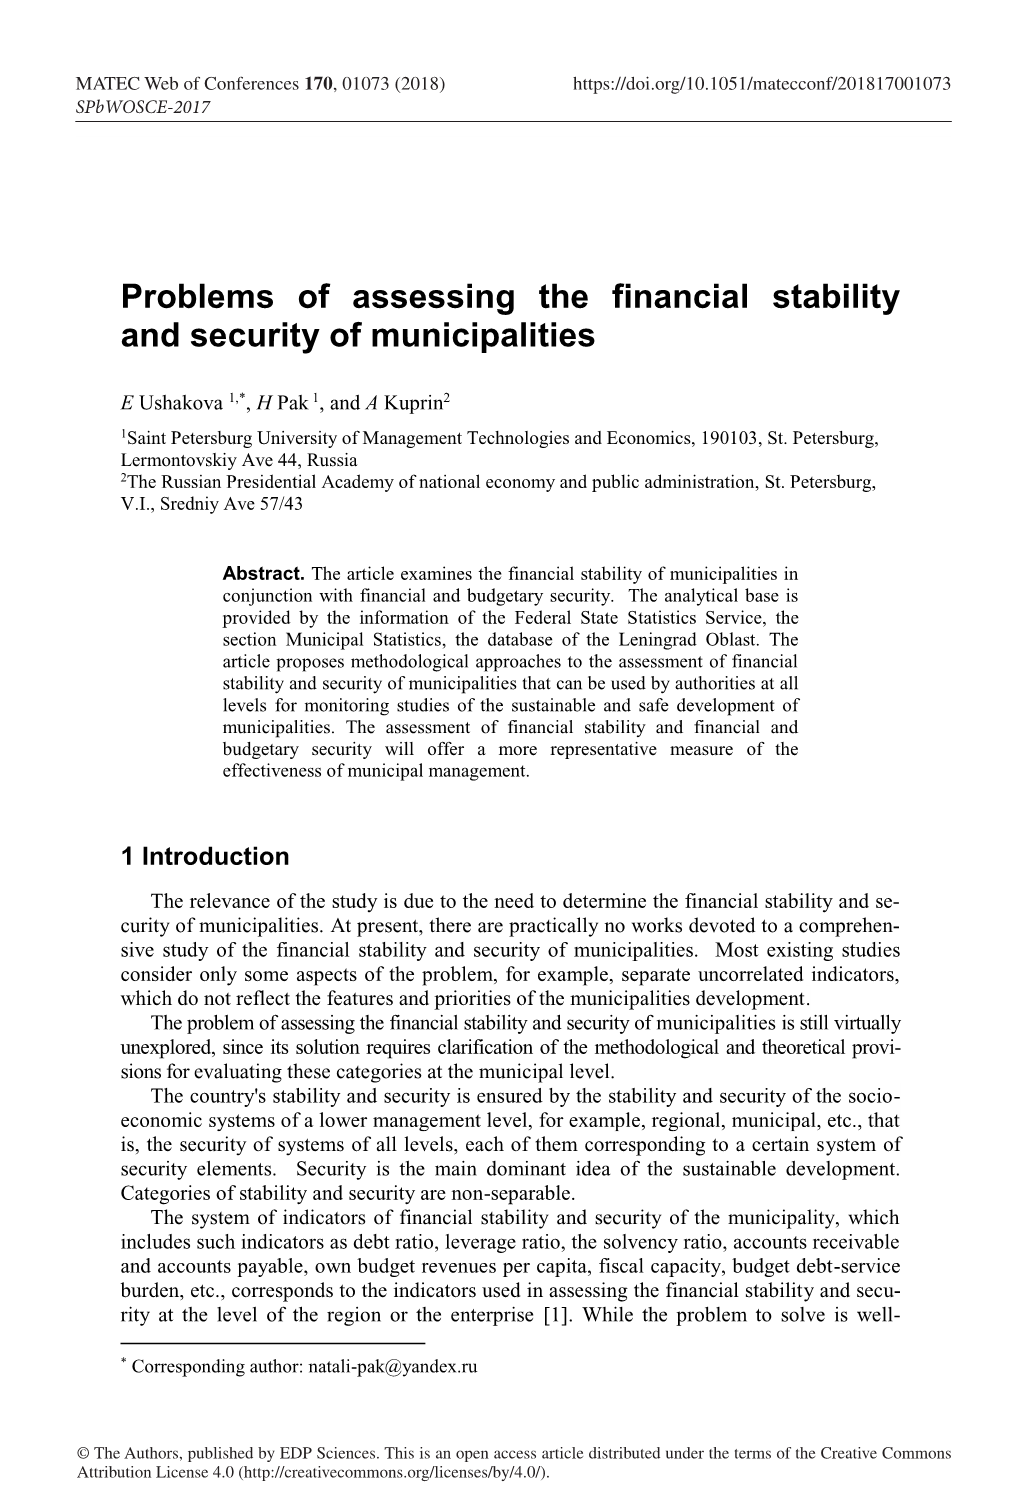 Problems of Assessing the Financial Stability and Security of Municipalities